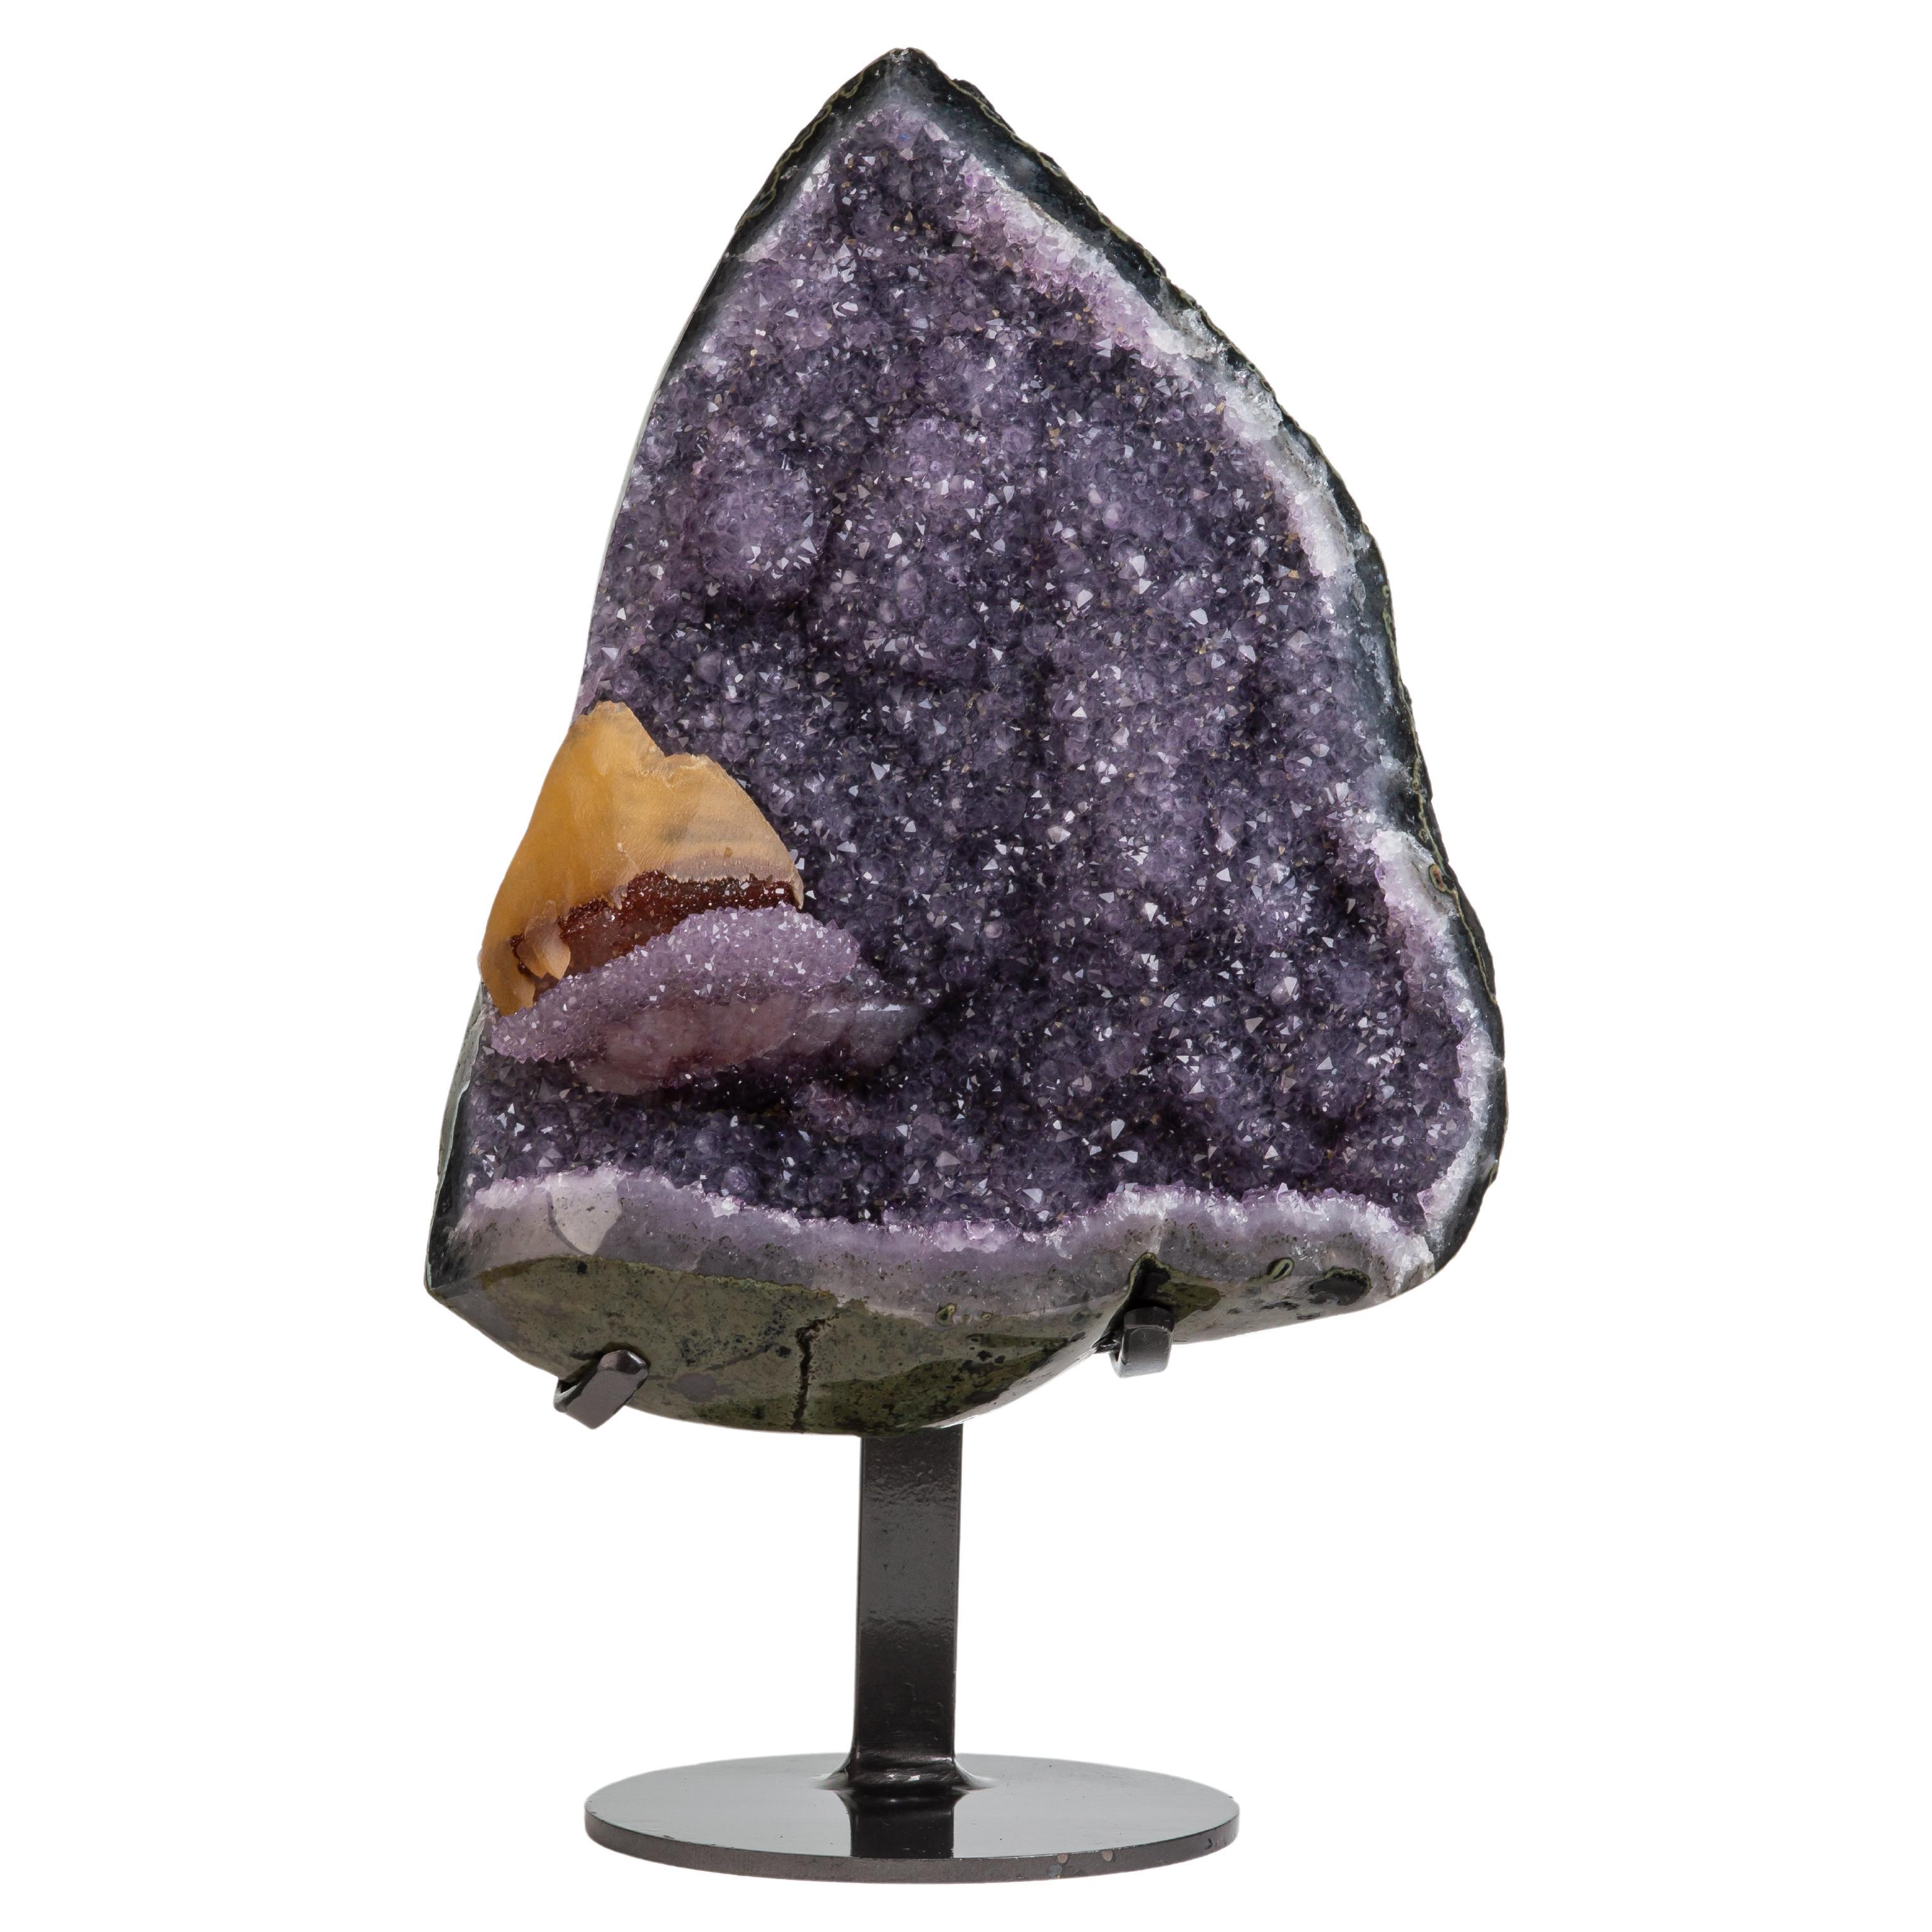 Triangular Geode Section with Perched Calcite For Sale